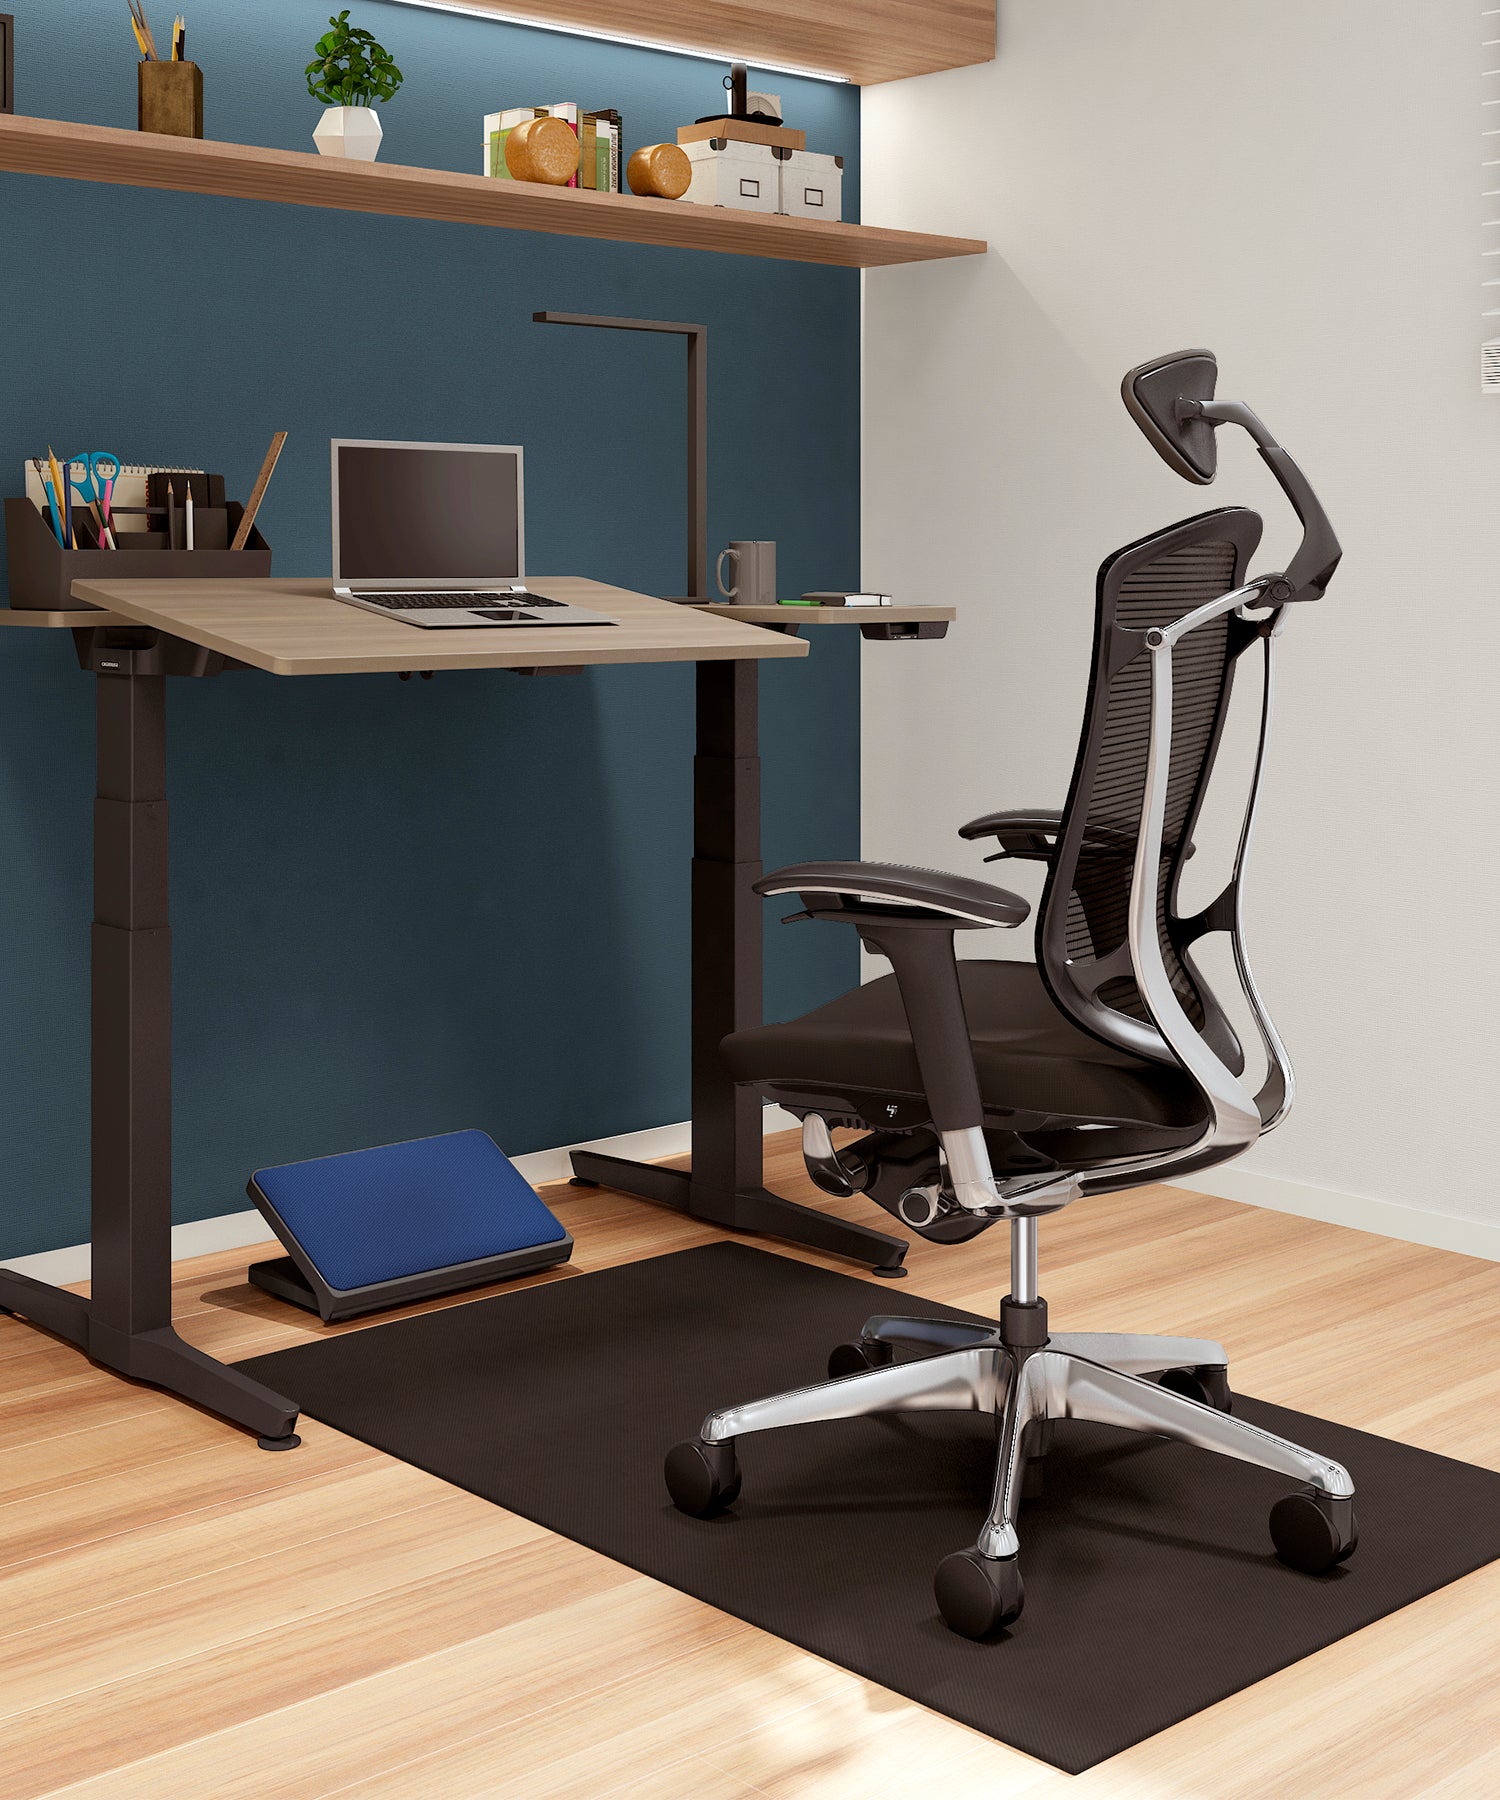 Contessa Seconda ergonomic chair with height adjustable chair in work from home setting